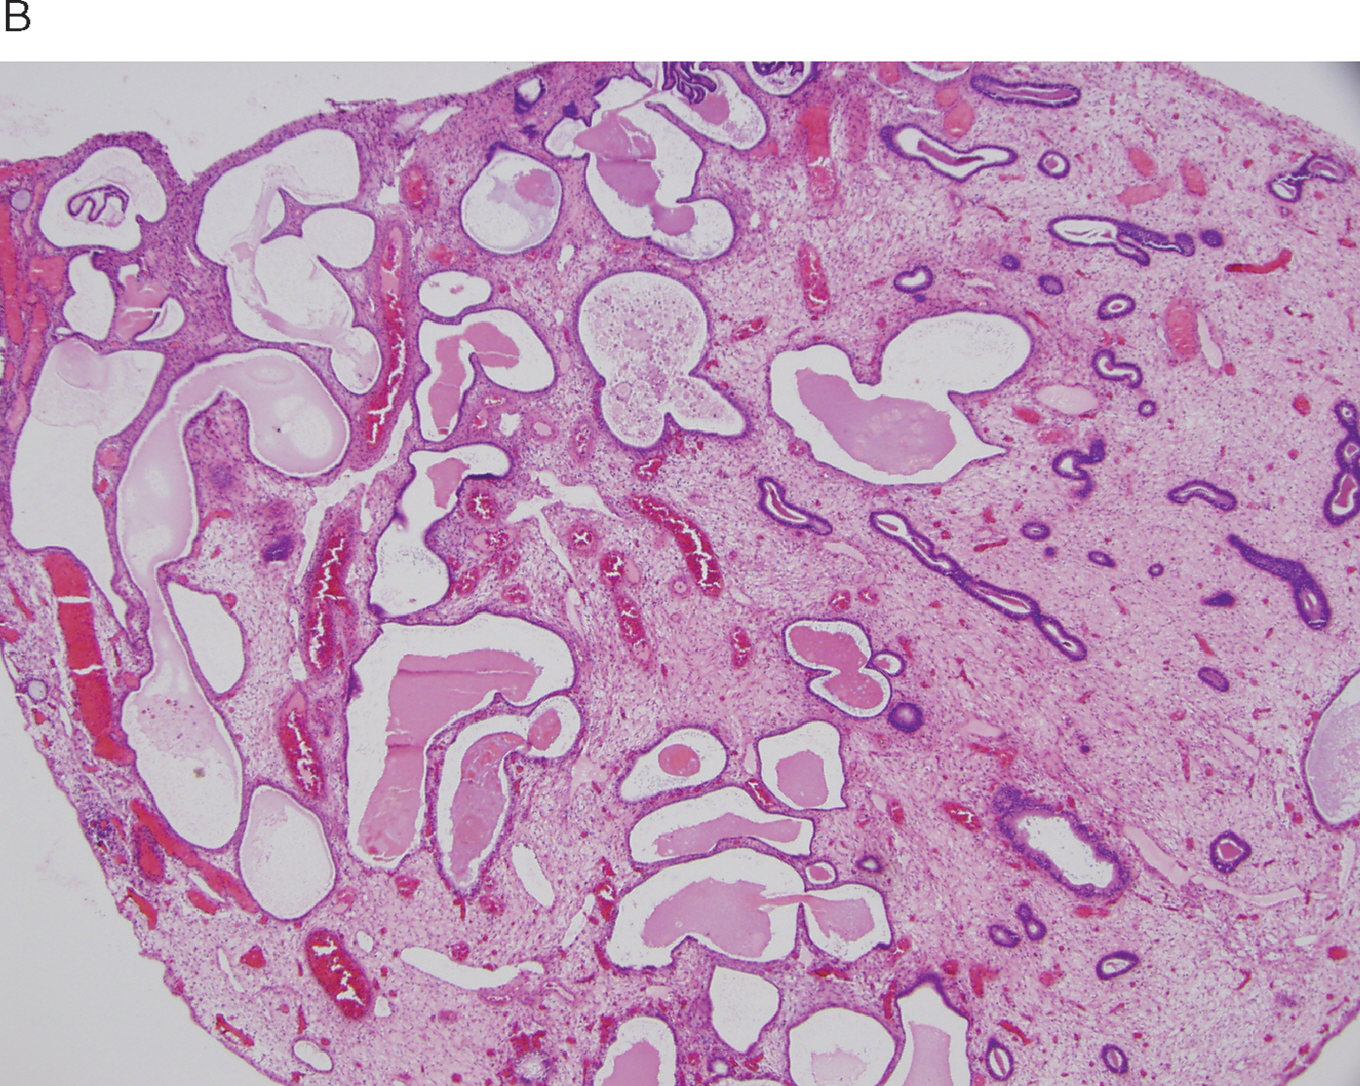 10 A section uterus by pathologist with, in the white ring, a